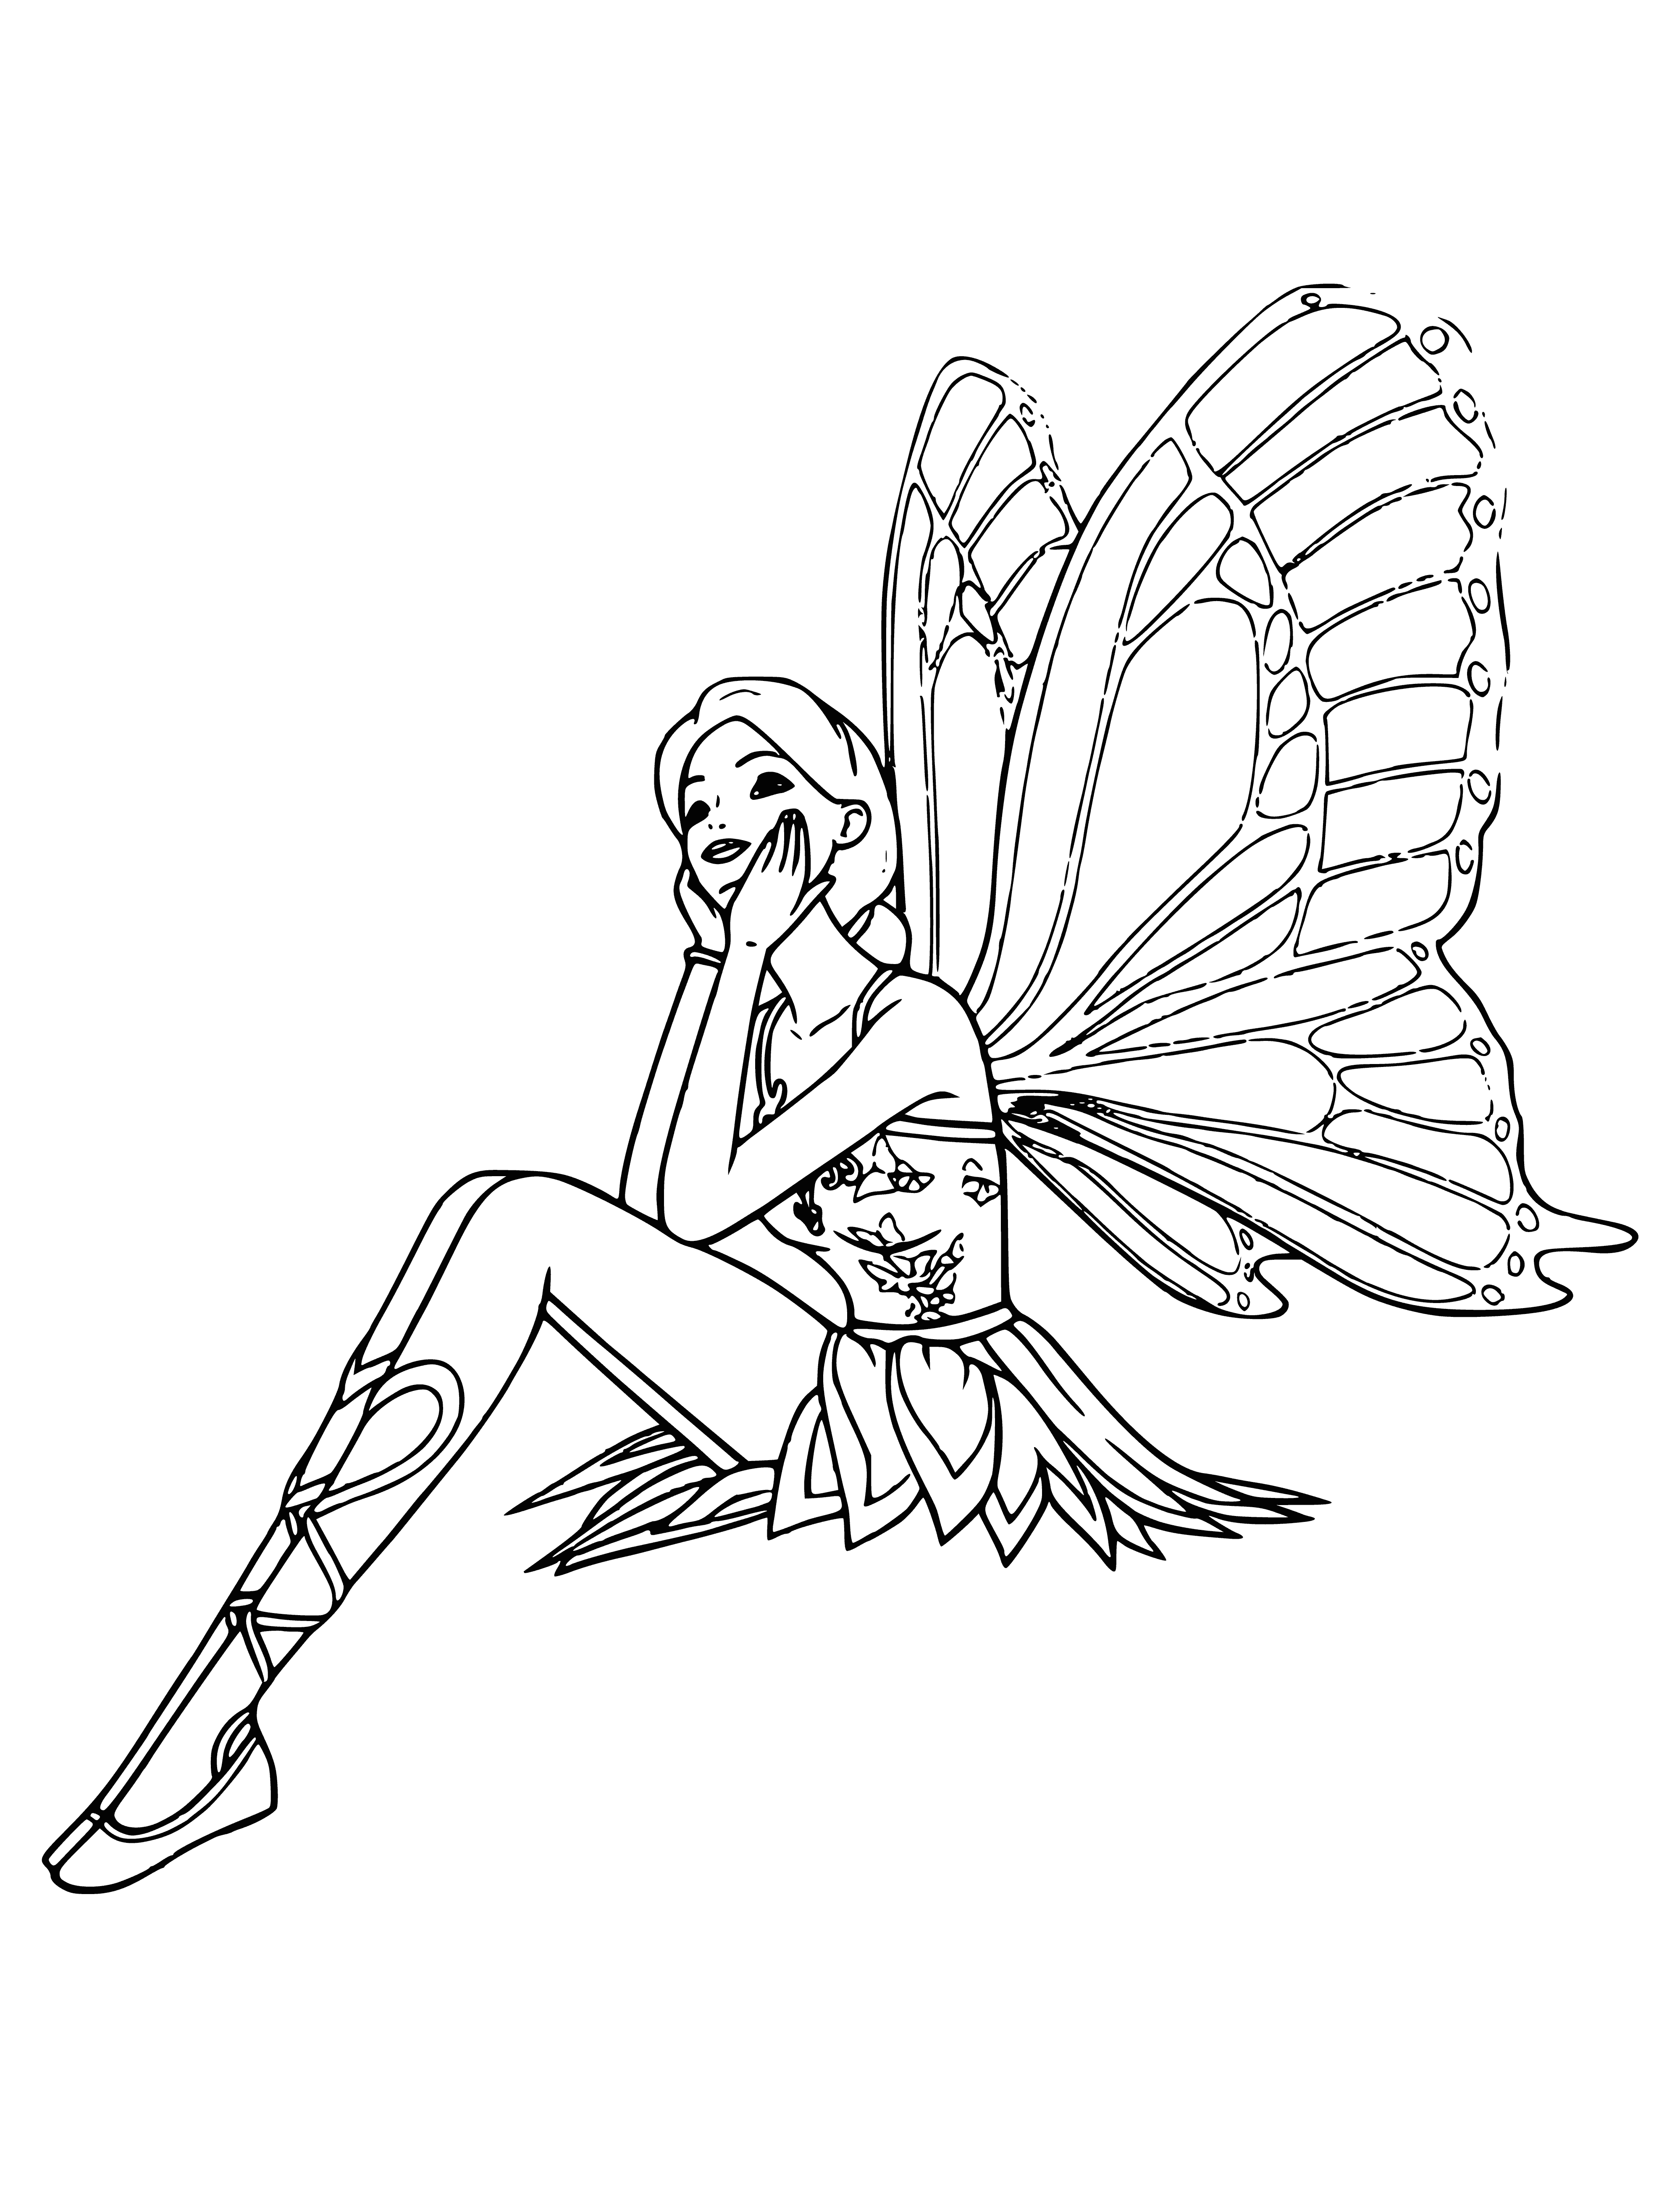 Fairy dream coloring page